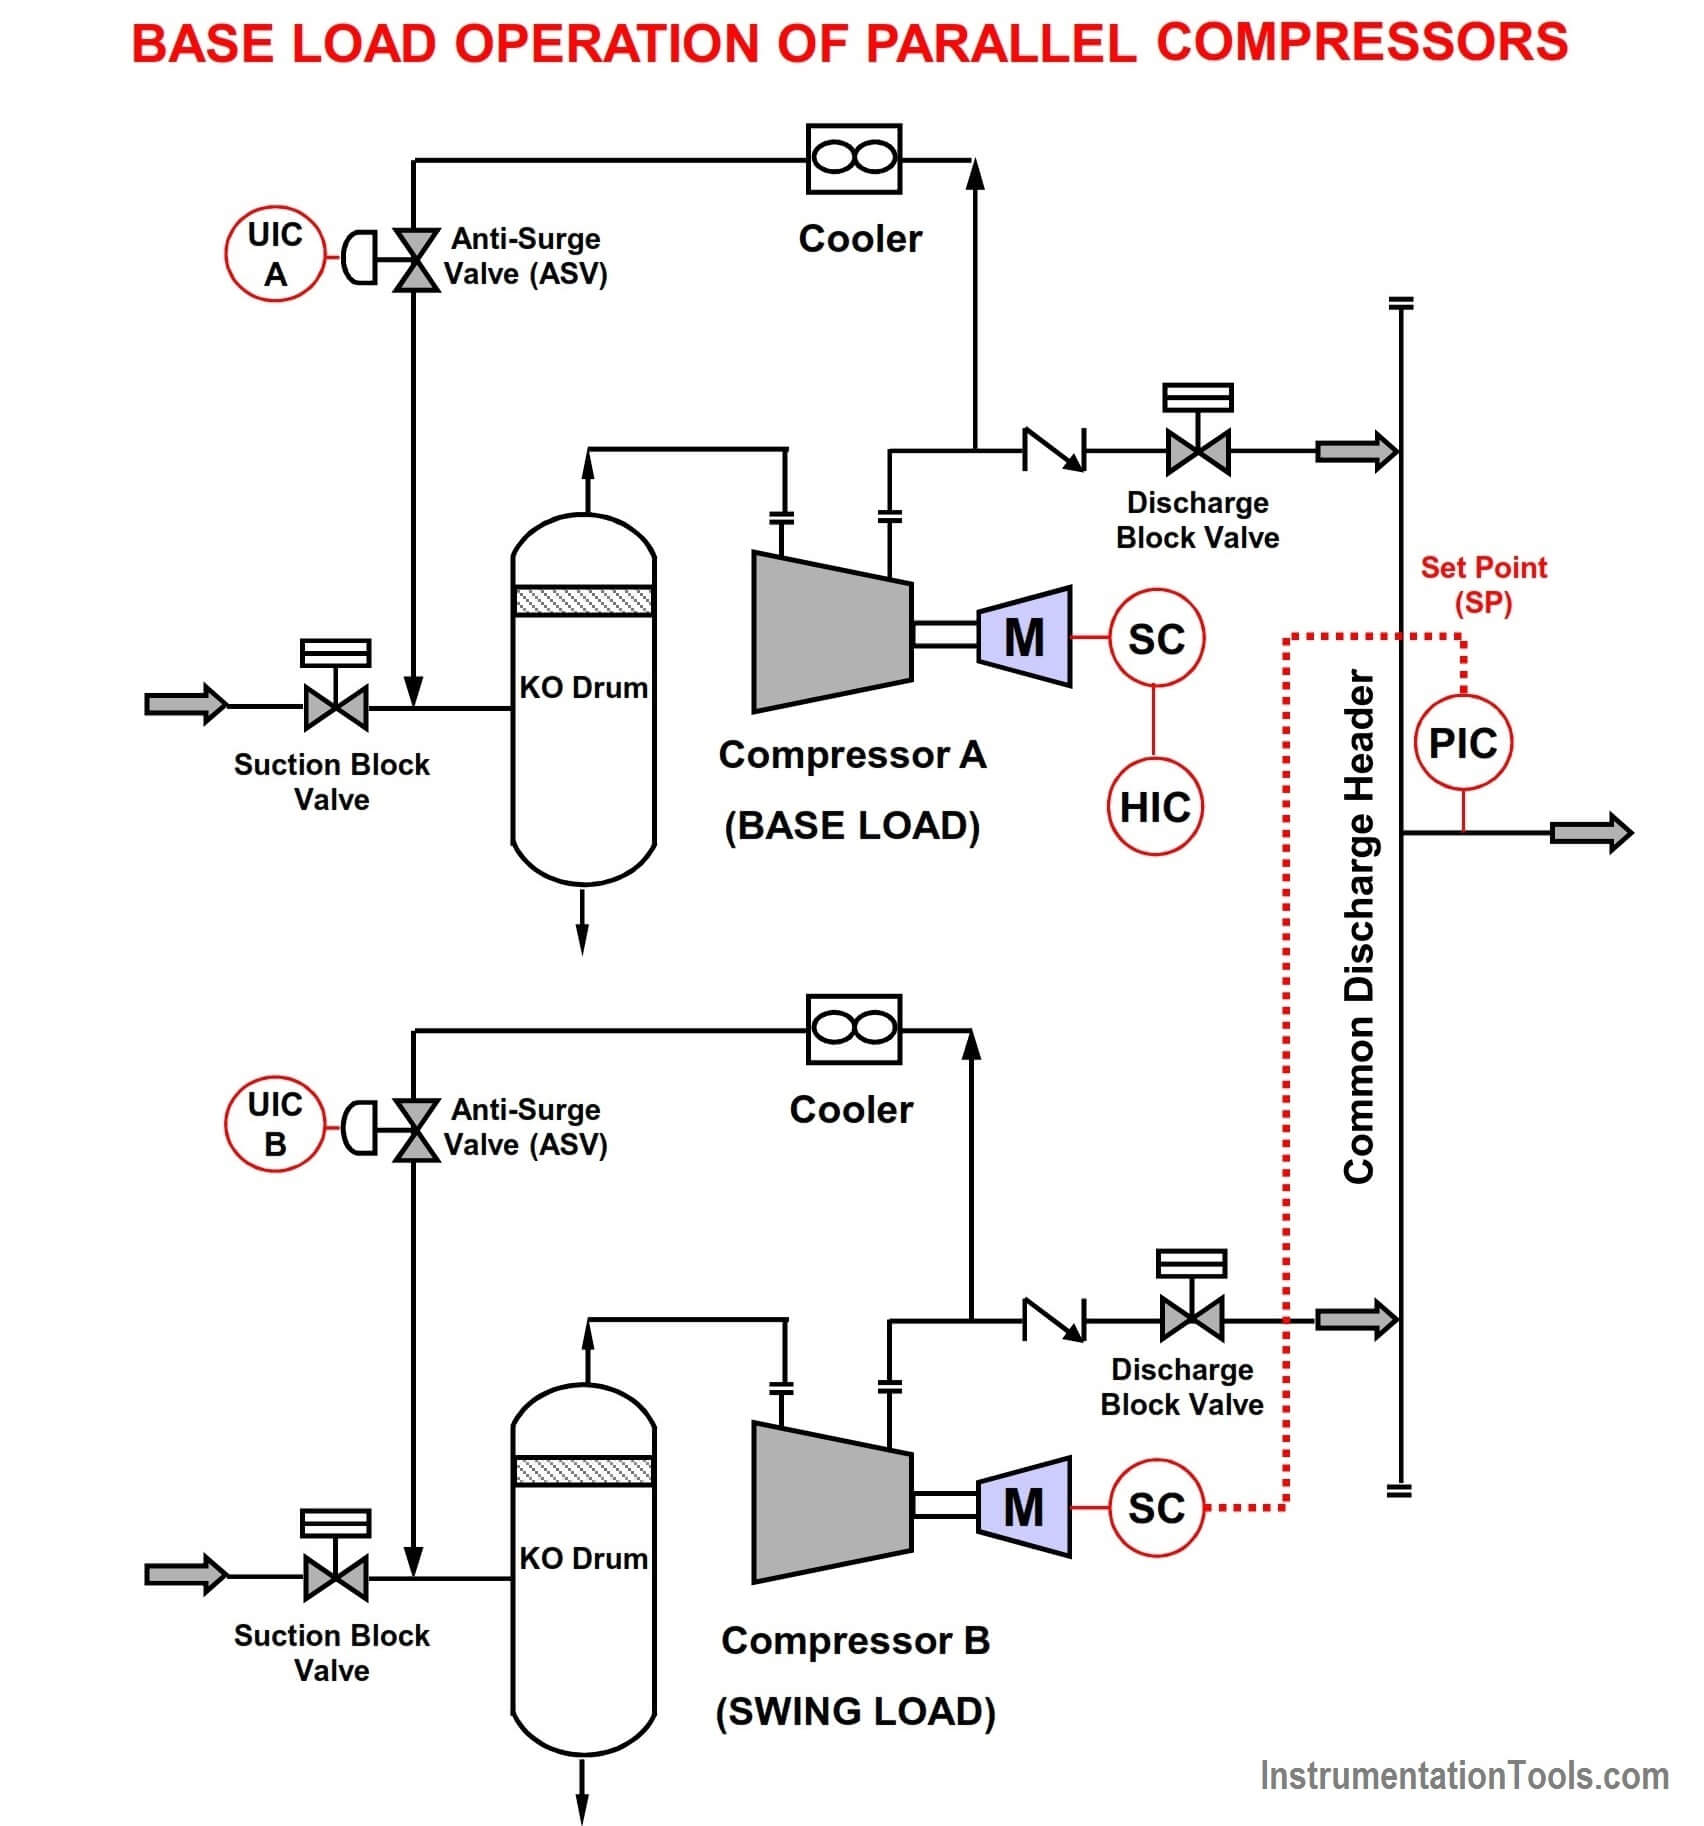 Base Load Operation of Parallel Compressors